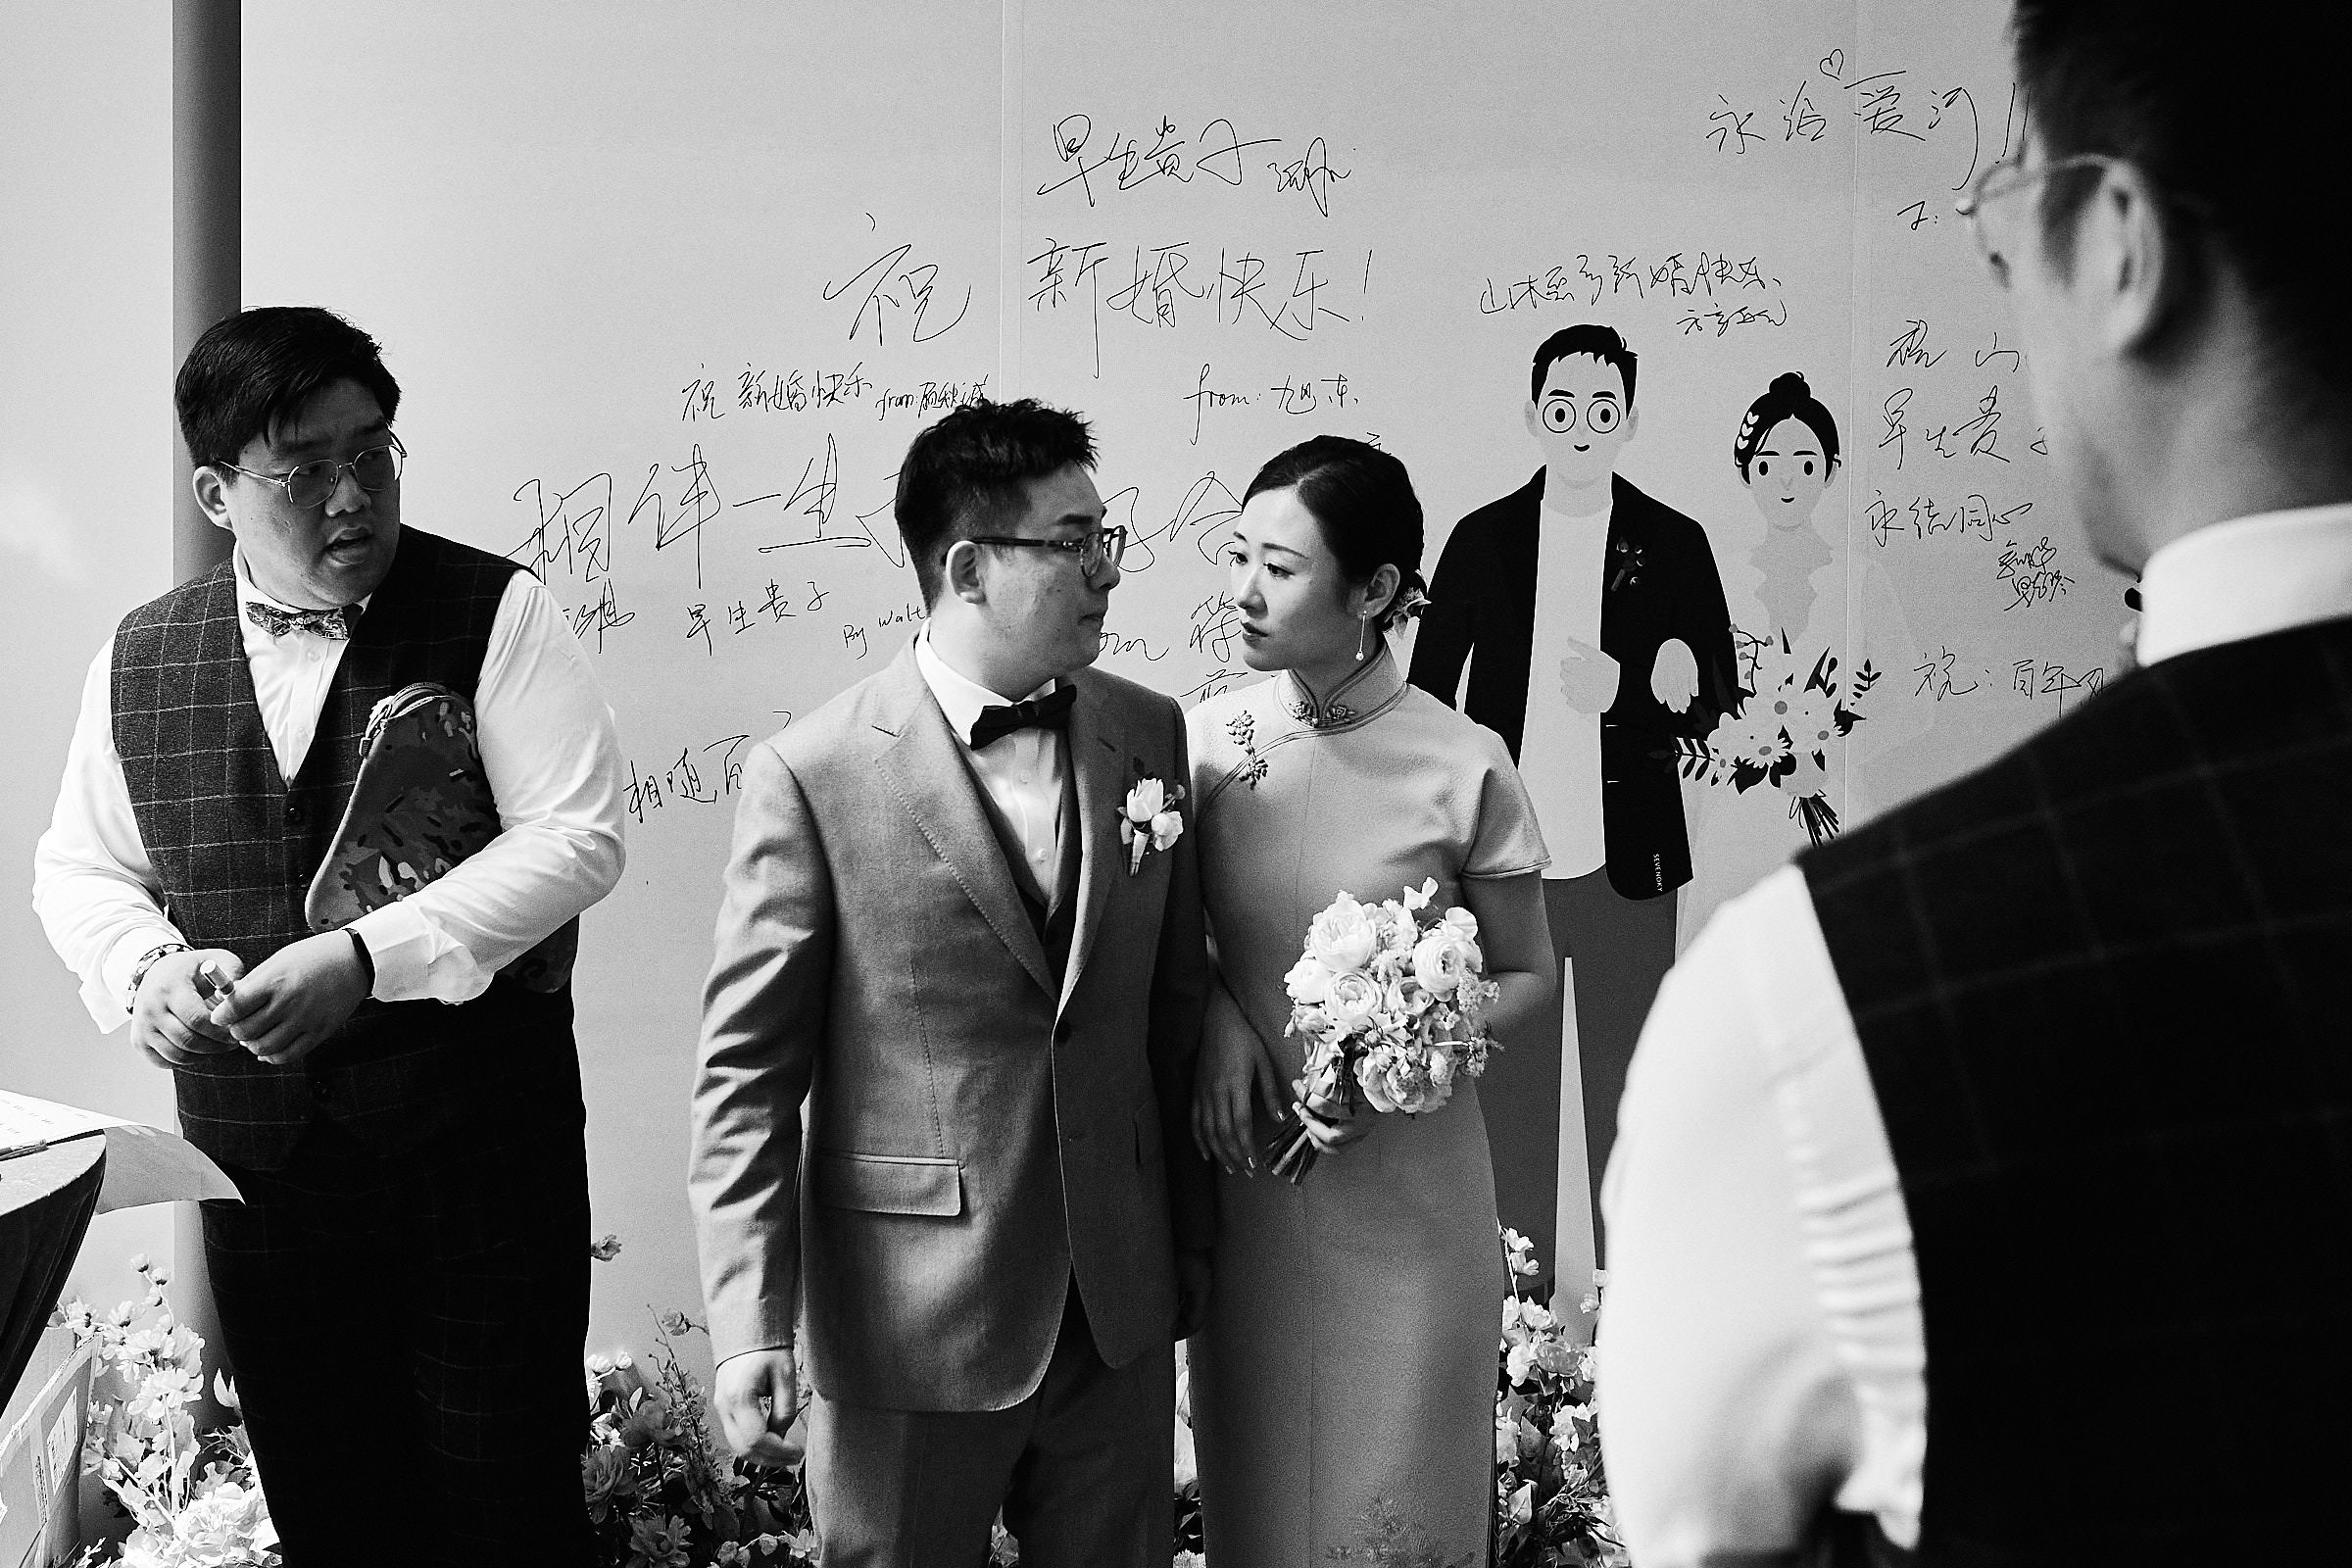 Bride With Groom And Groomsman In Black And White Standing Next To A Big Poster And Drawing Of Them In Their Shanghai Wedding